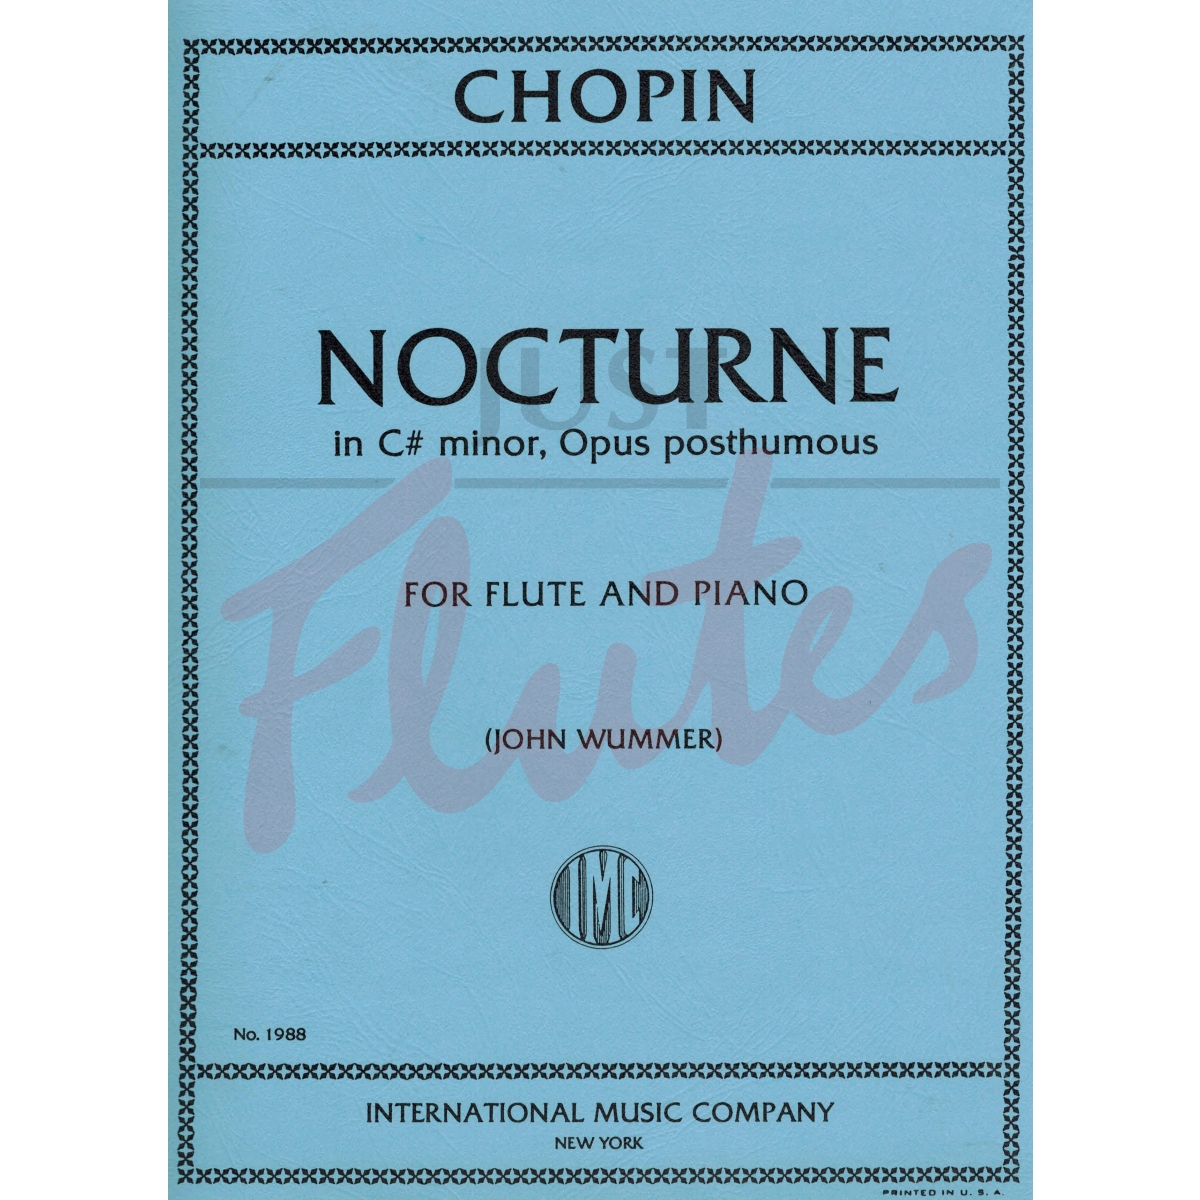 Nocturne in C# minor for Flute and Piano